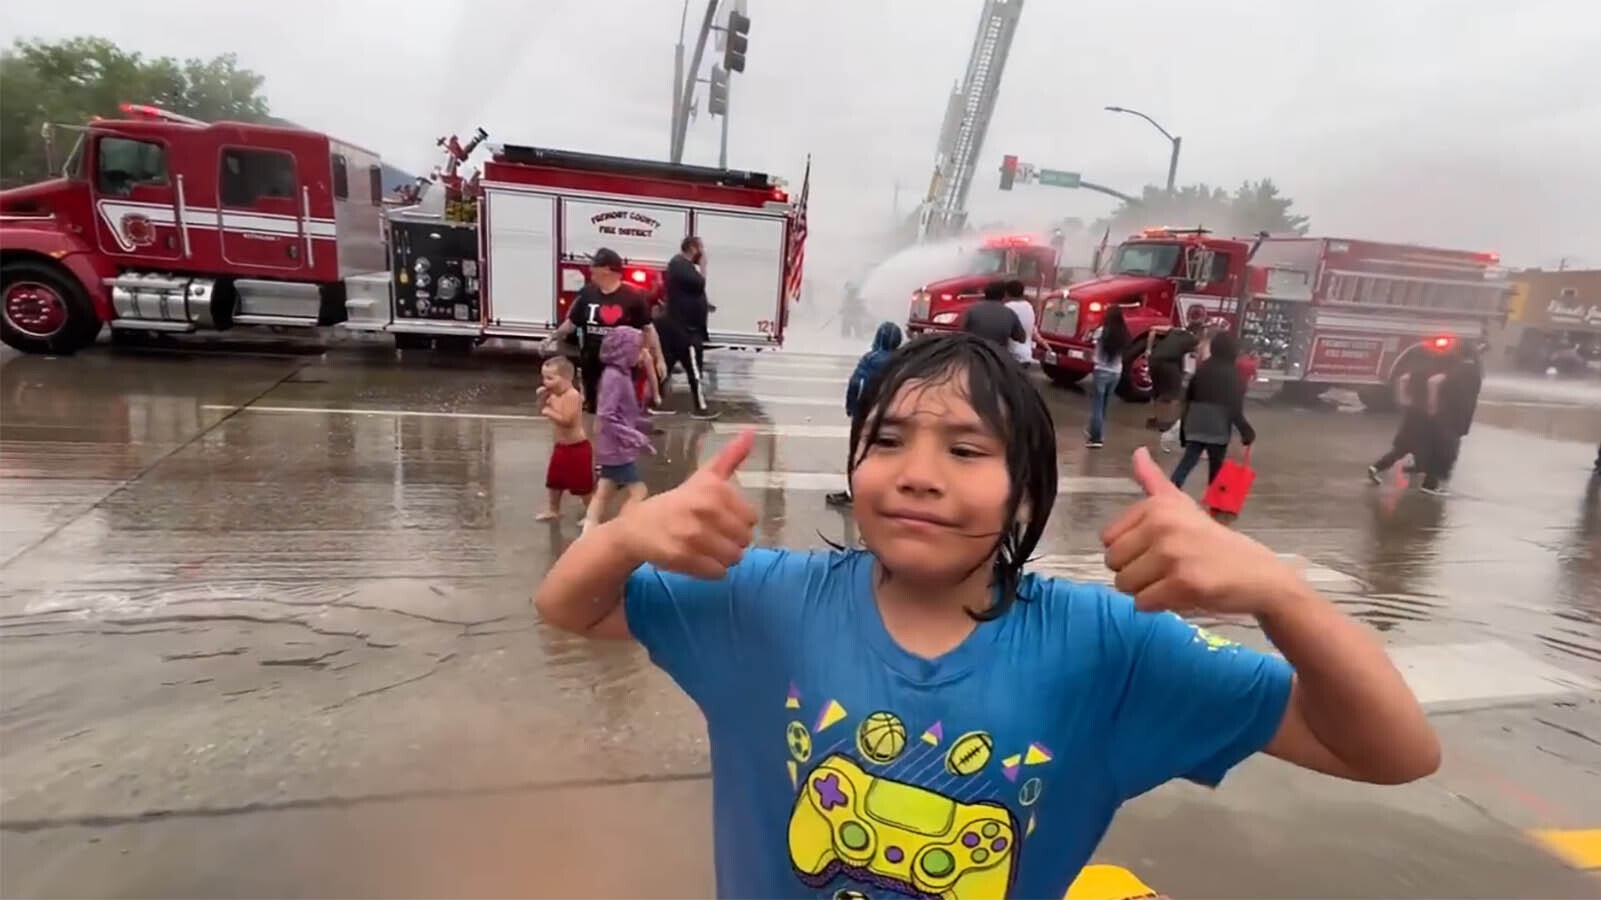 Nothing was going to dampen Lander's Fourth of July celebration, not even cooler than normal temperatures and intermittent rain.